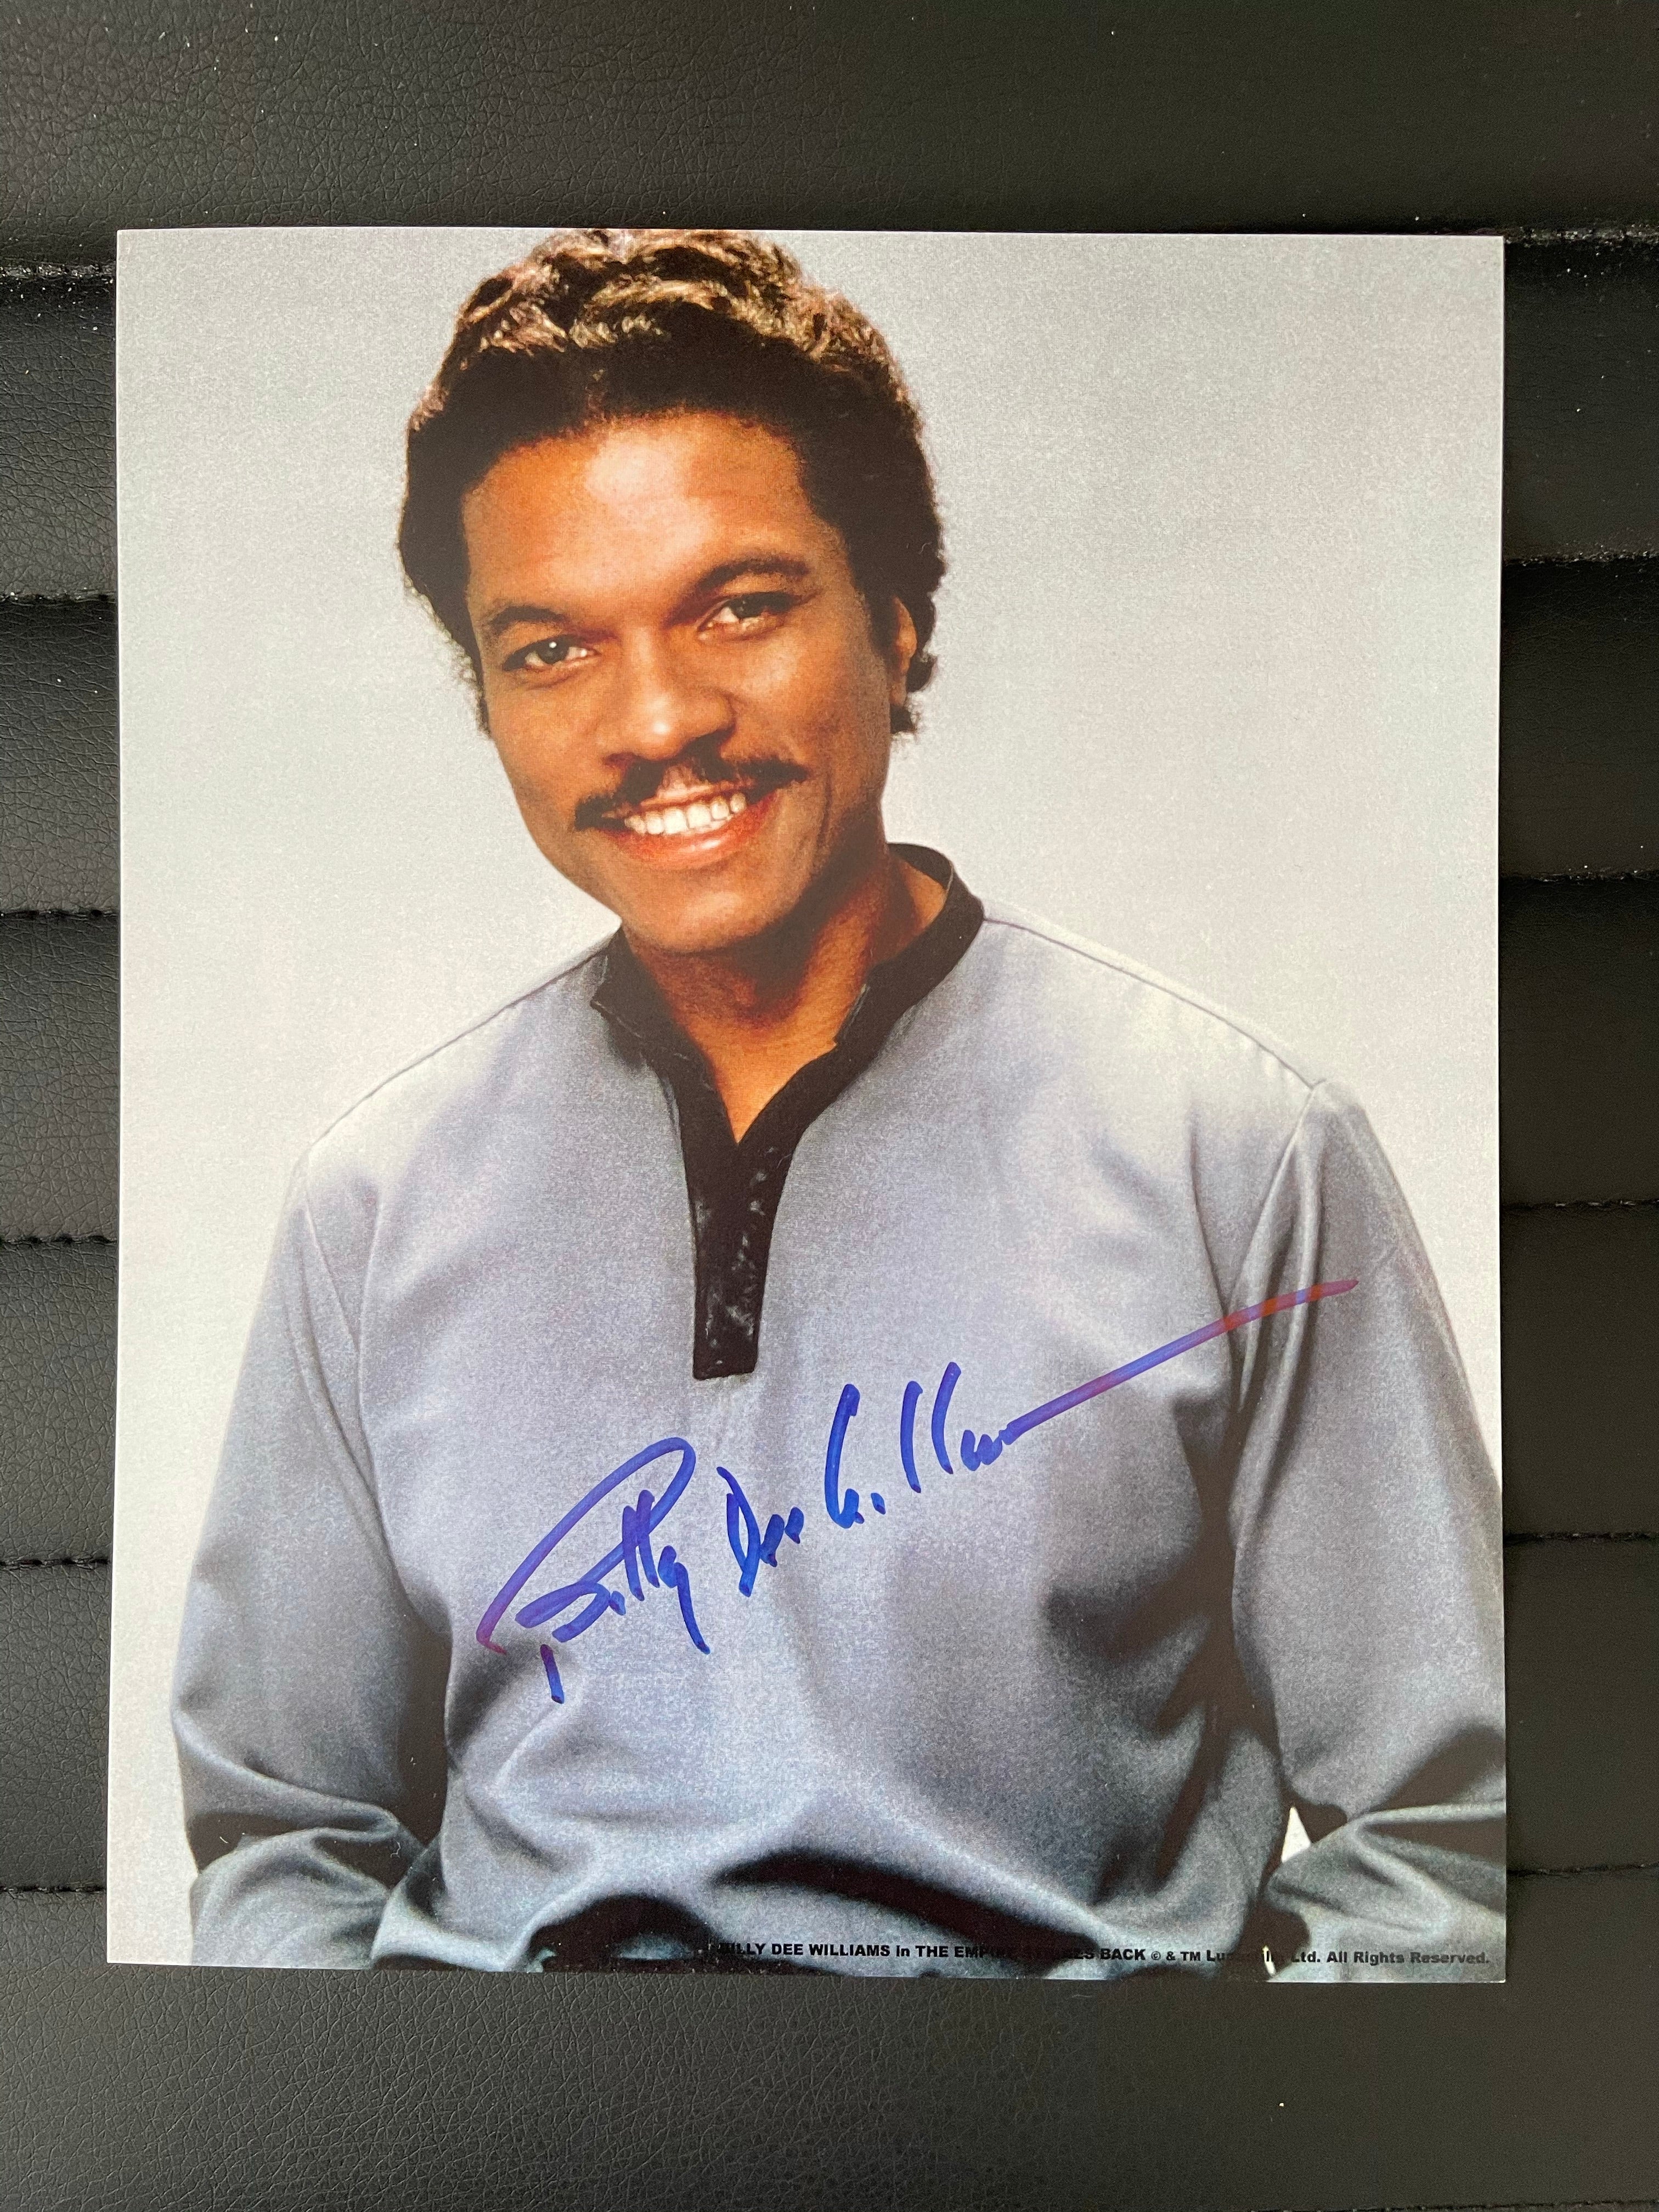 Star Wars Billy Dee Williams signed photo with COA